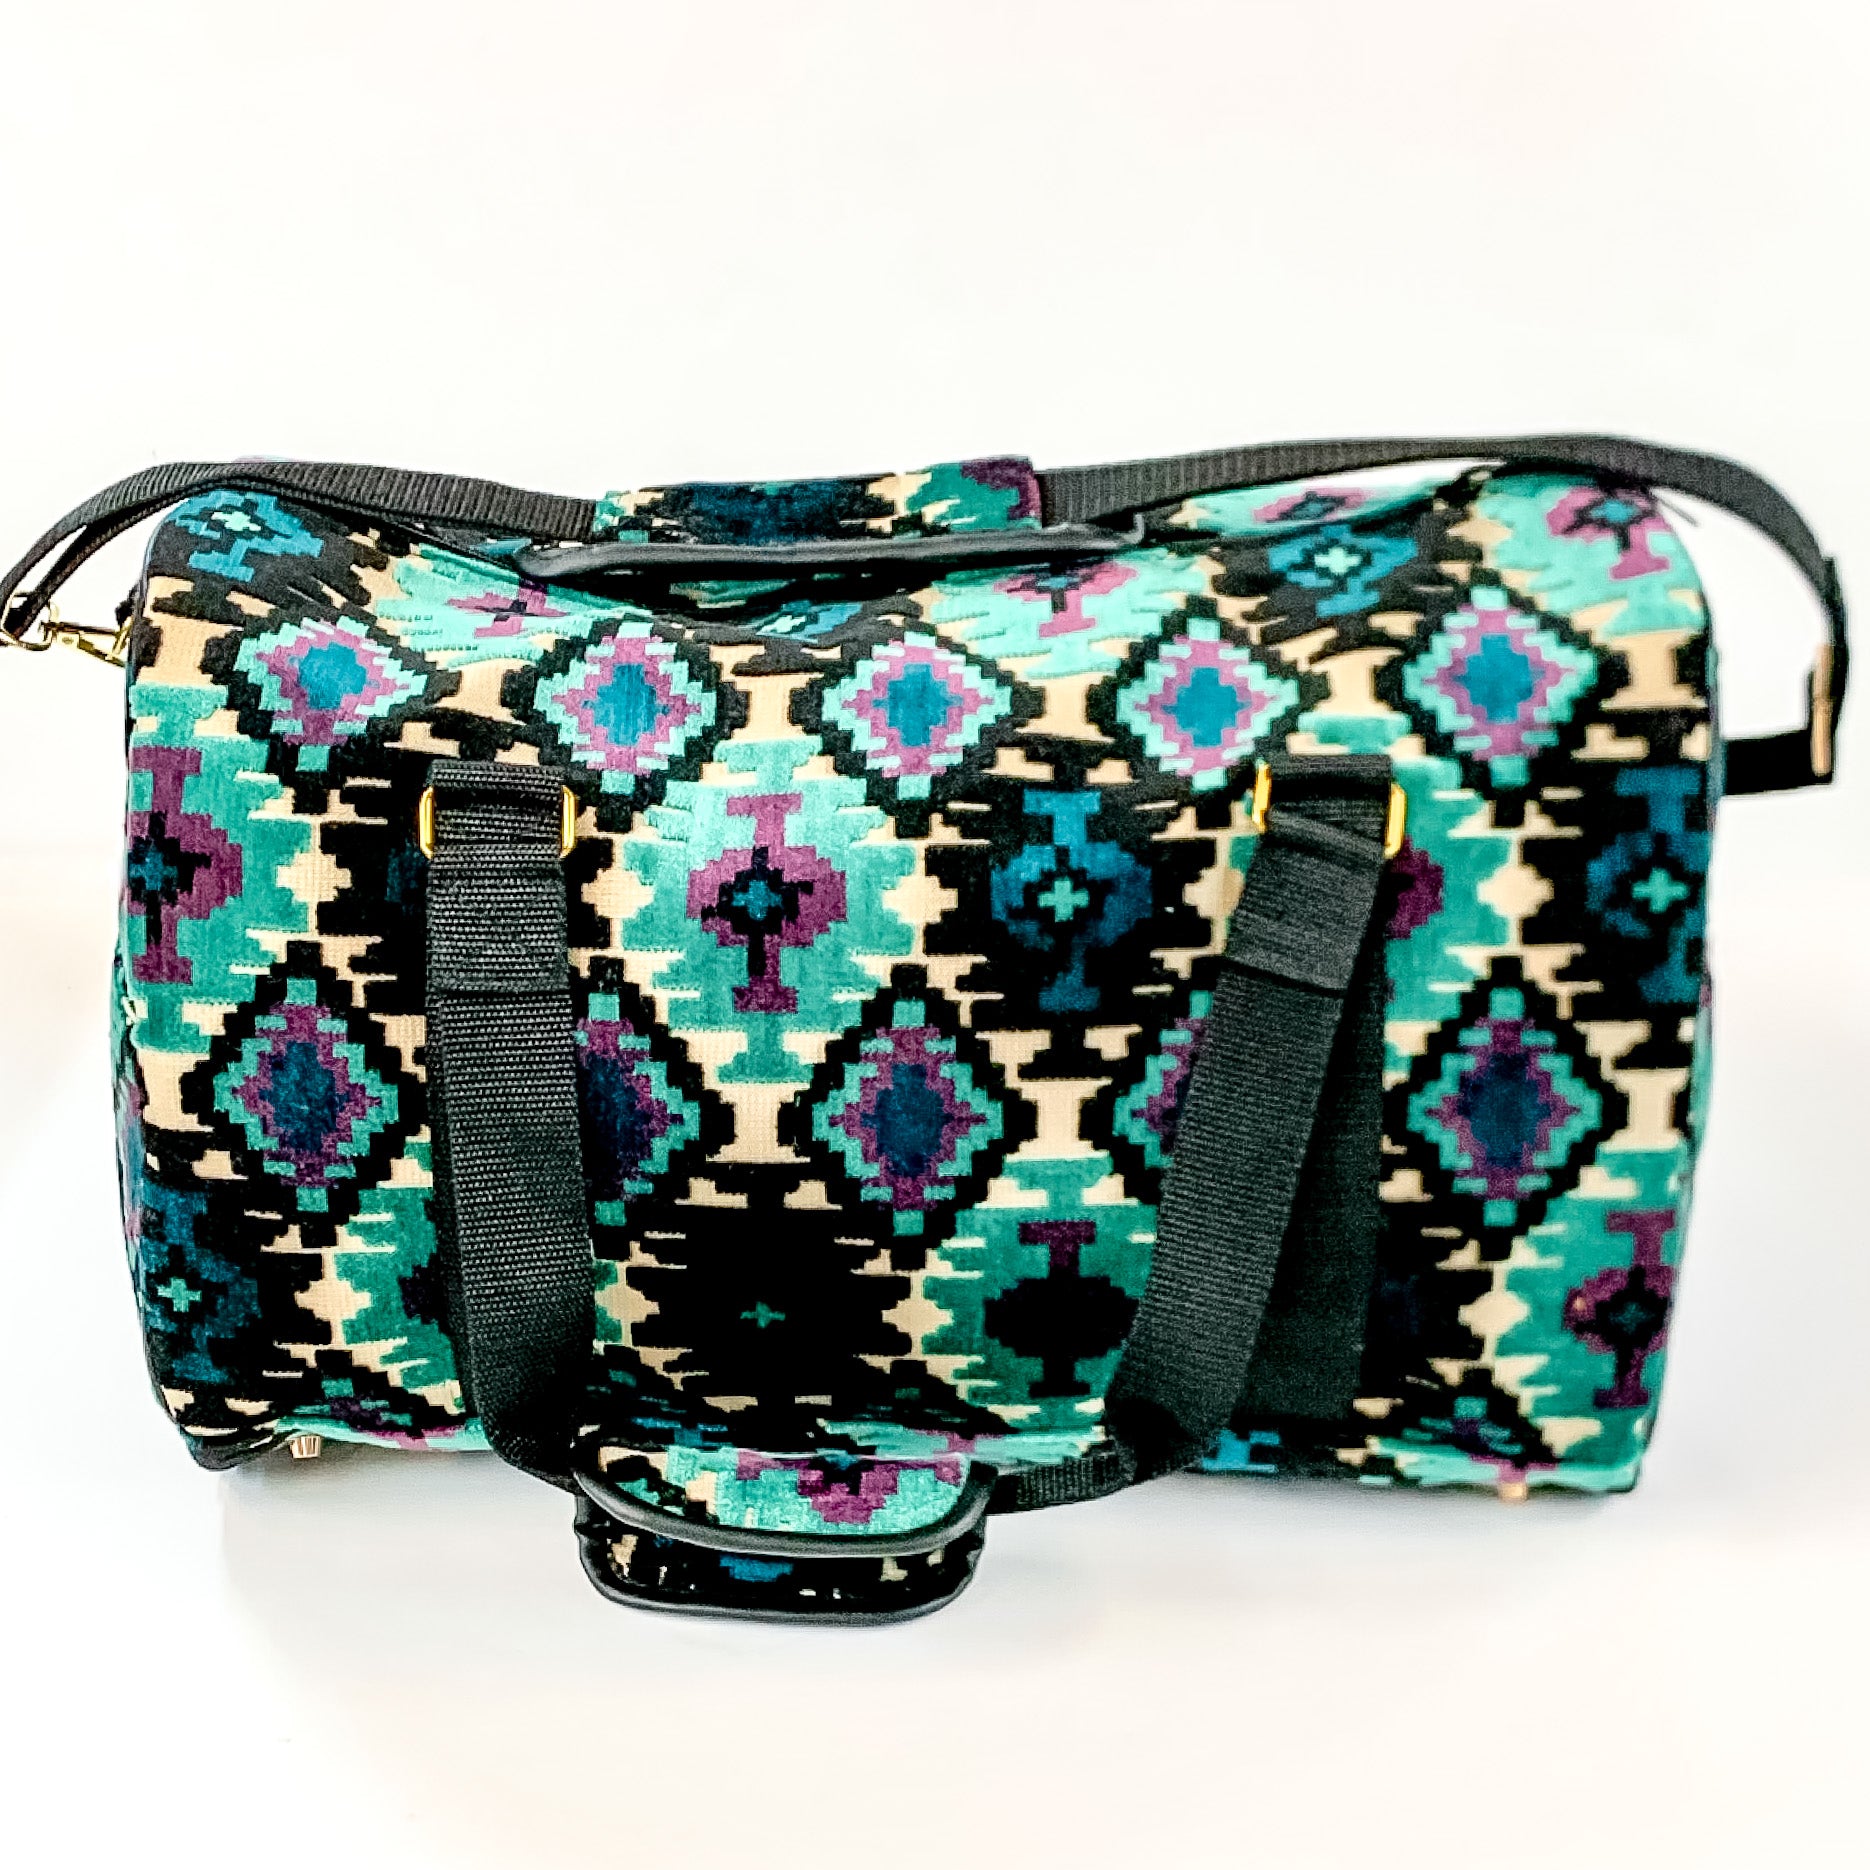 Makeup Junkie | Midnight Aztec Duffel Bag in Turquoise Green and Black Mix - Giddy Up Glamour Boutique